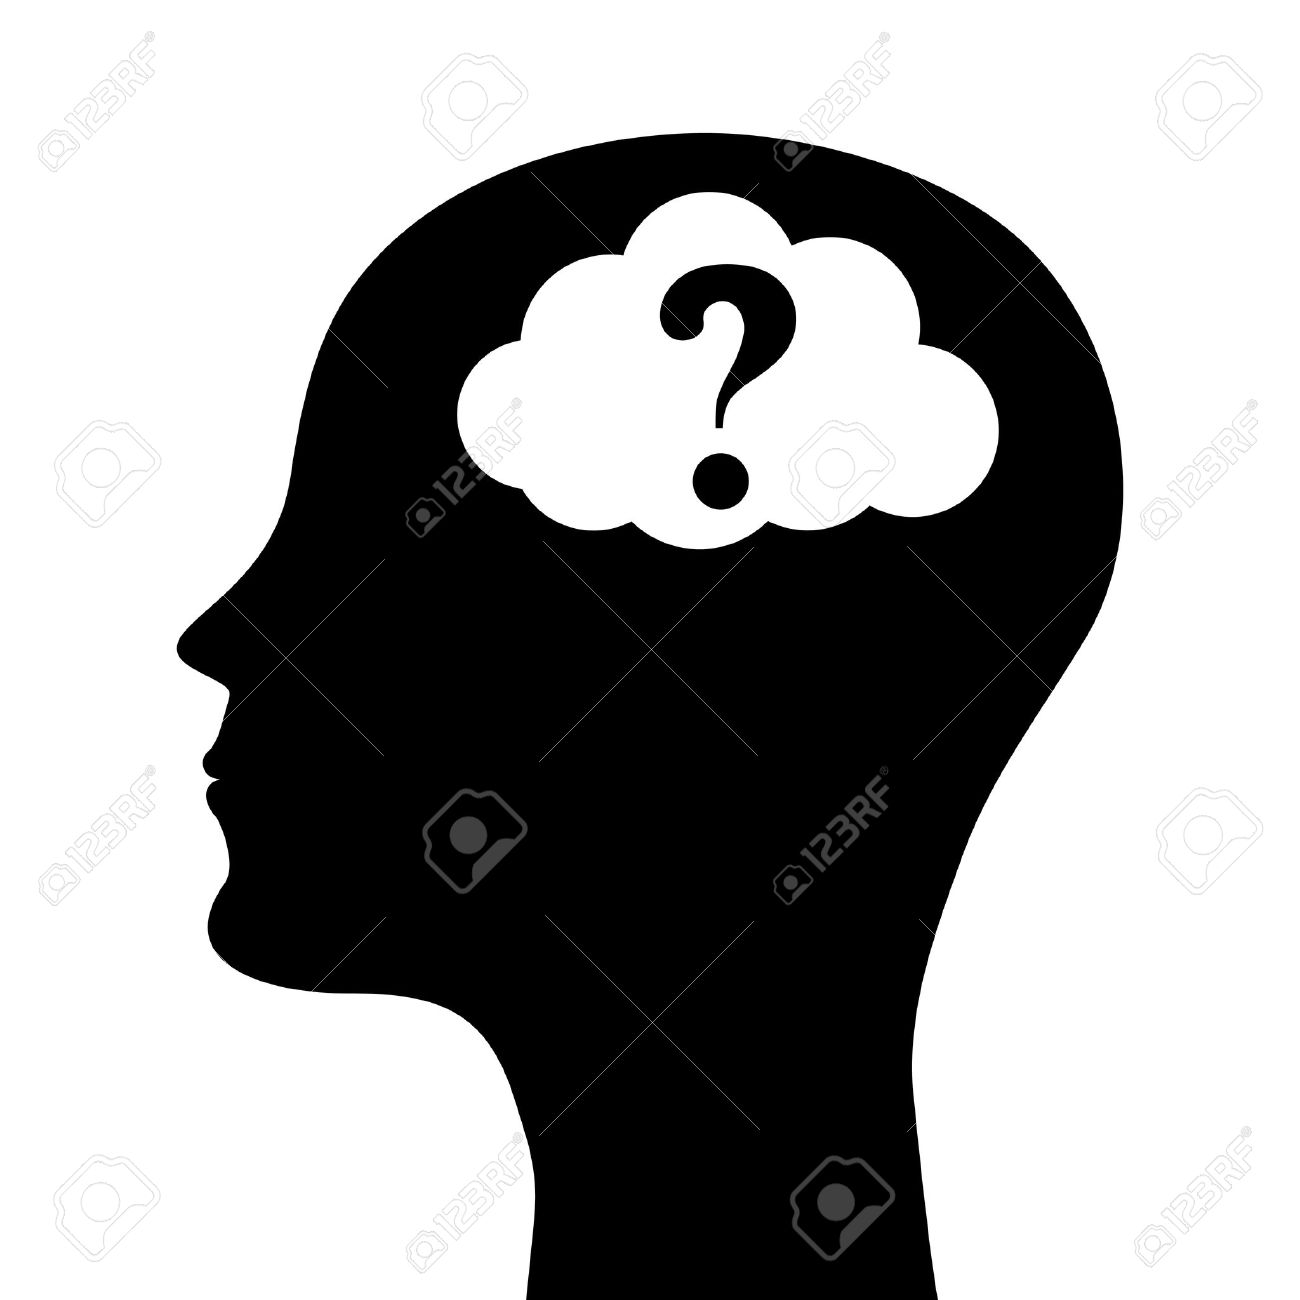 Human Head Silhouette With A Question Mark Vector Royalty Free.